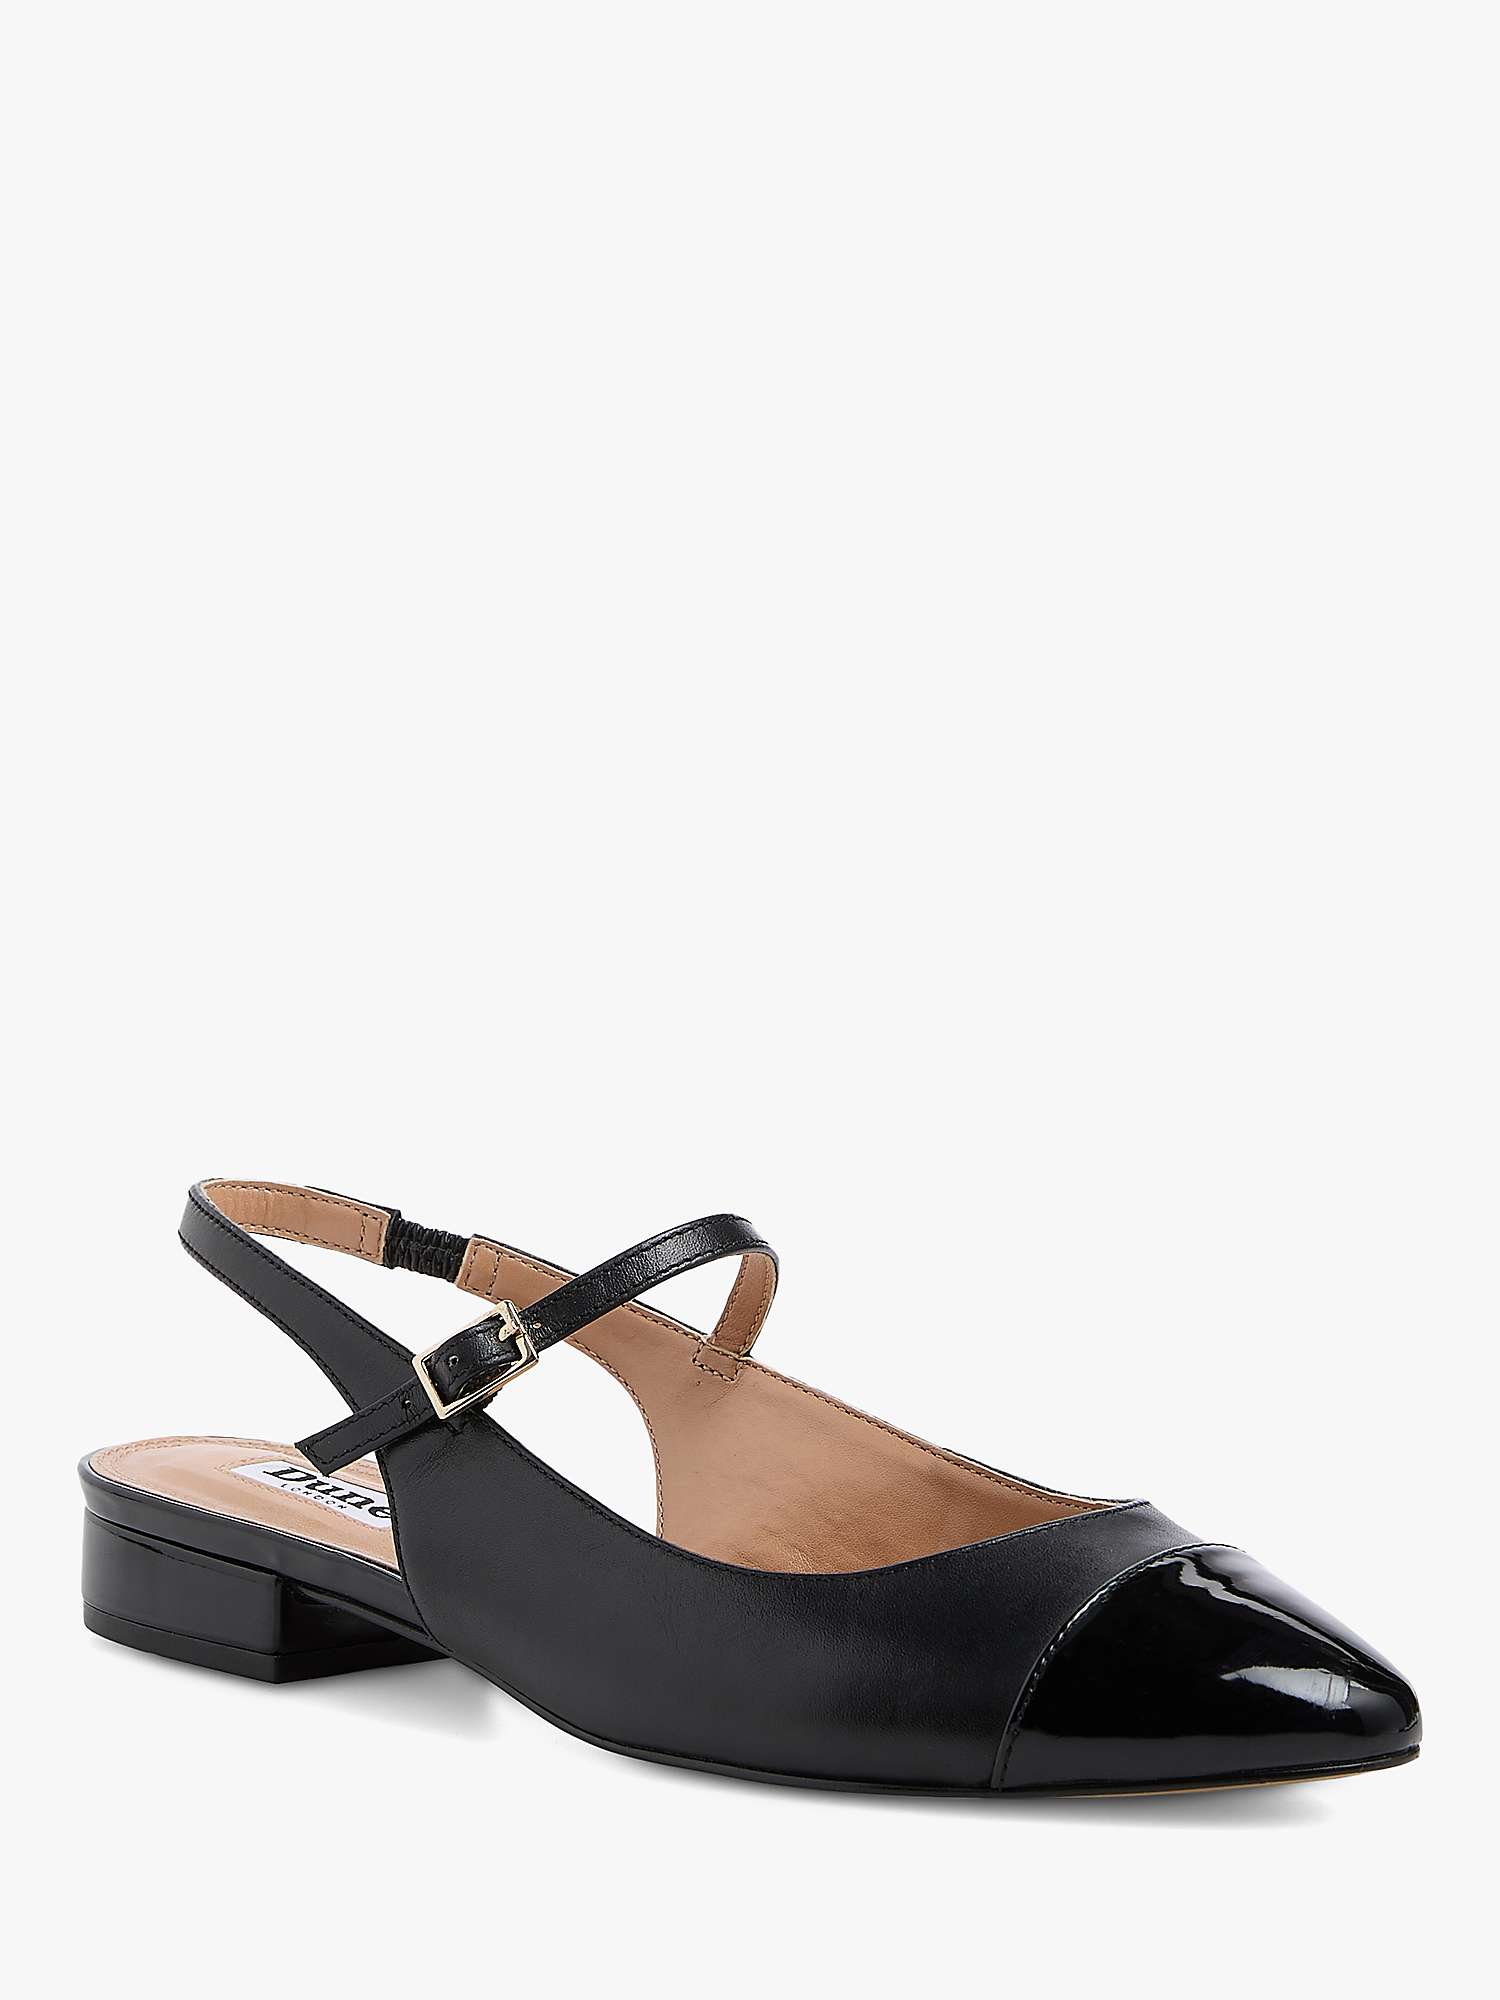 Buy Dune Hayes Leather Round Slingback Shoes Online at johnlewis.com